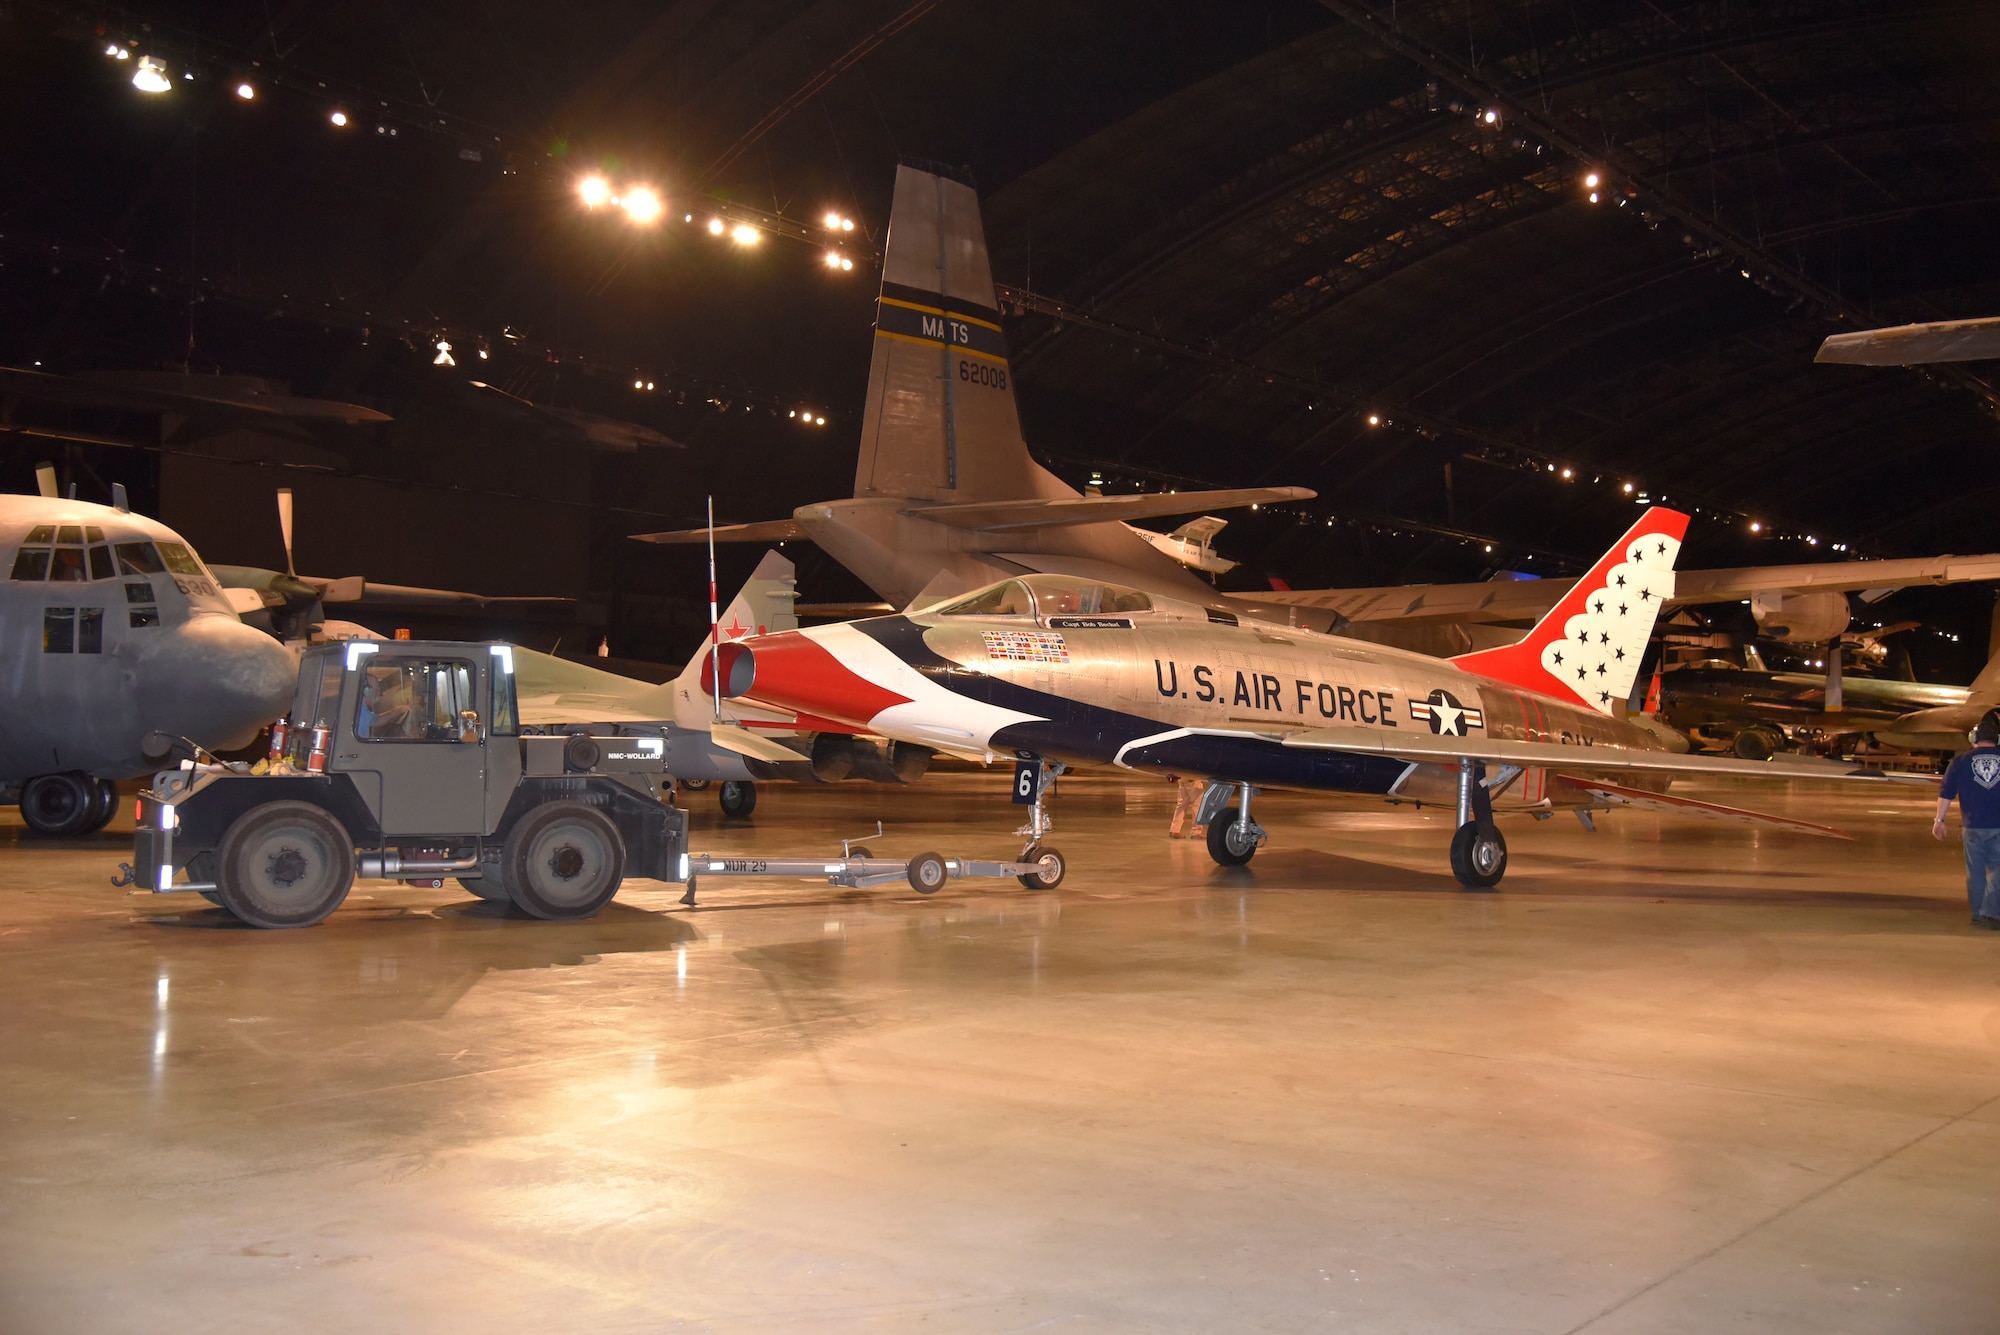 DAYTON, Ohio -- The North American F-100D Super Sabre  being moved into position in the Cold War Gallery at the National Museum of the United States Air Force. The restoration crew members worked as part of a team to complete the gallery reconfiguration on Jan. 26, 2017. (U.S. Air Force photo)